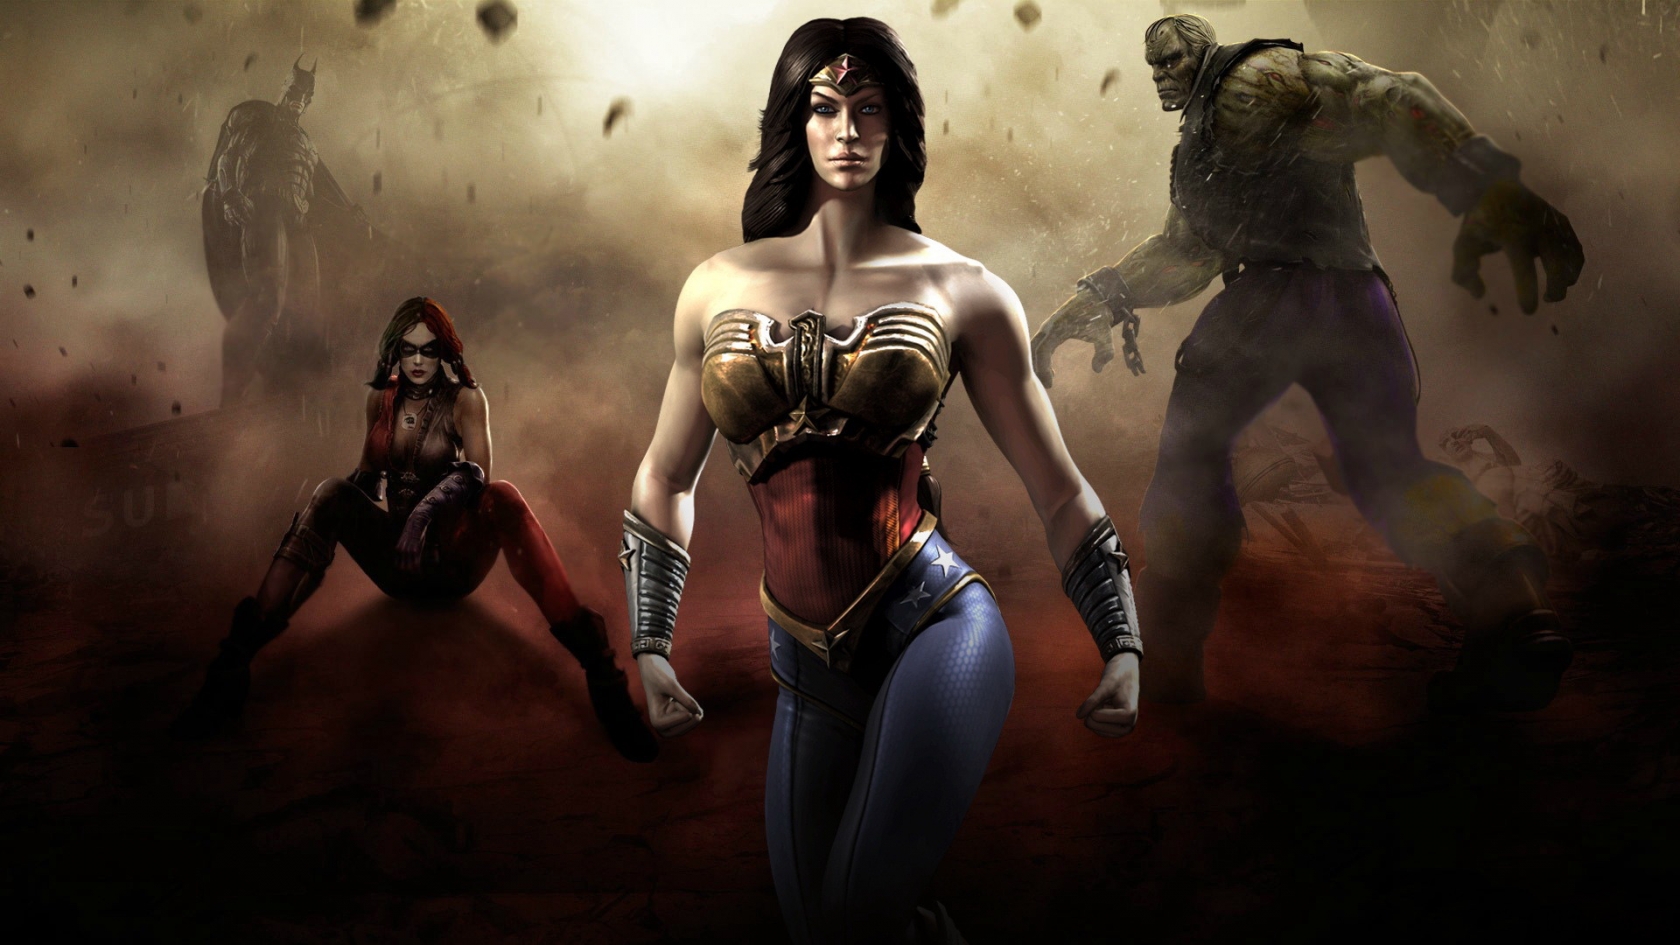 Injustice Heroes for 1680 x 945 HDTV resolution